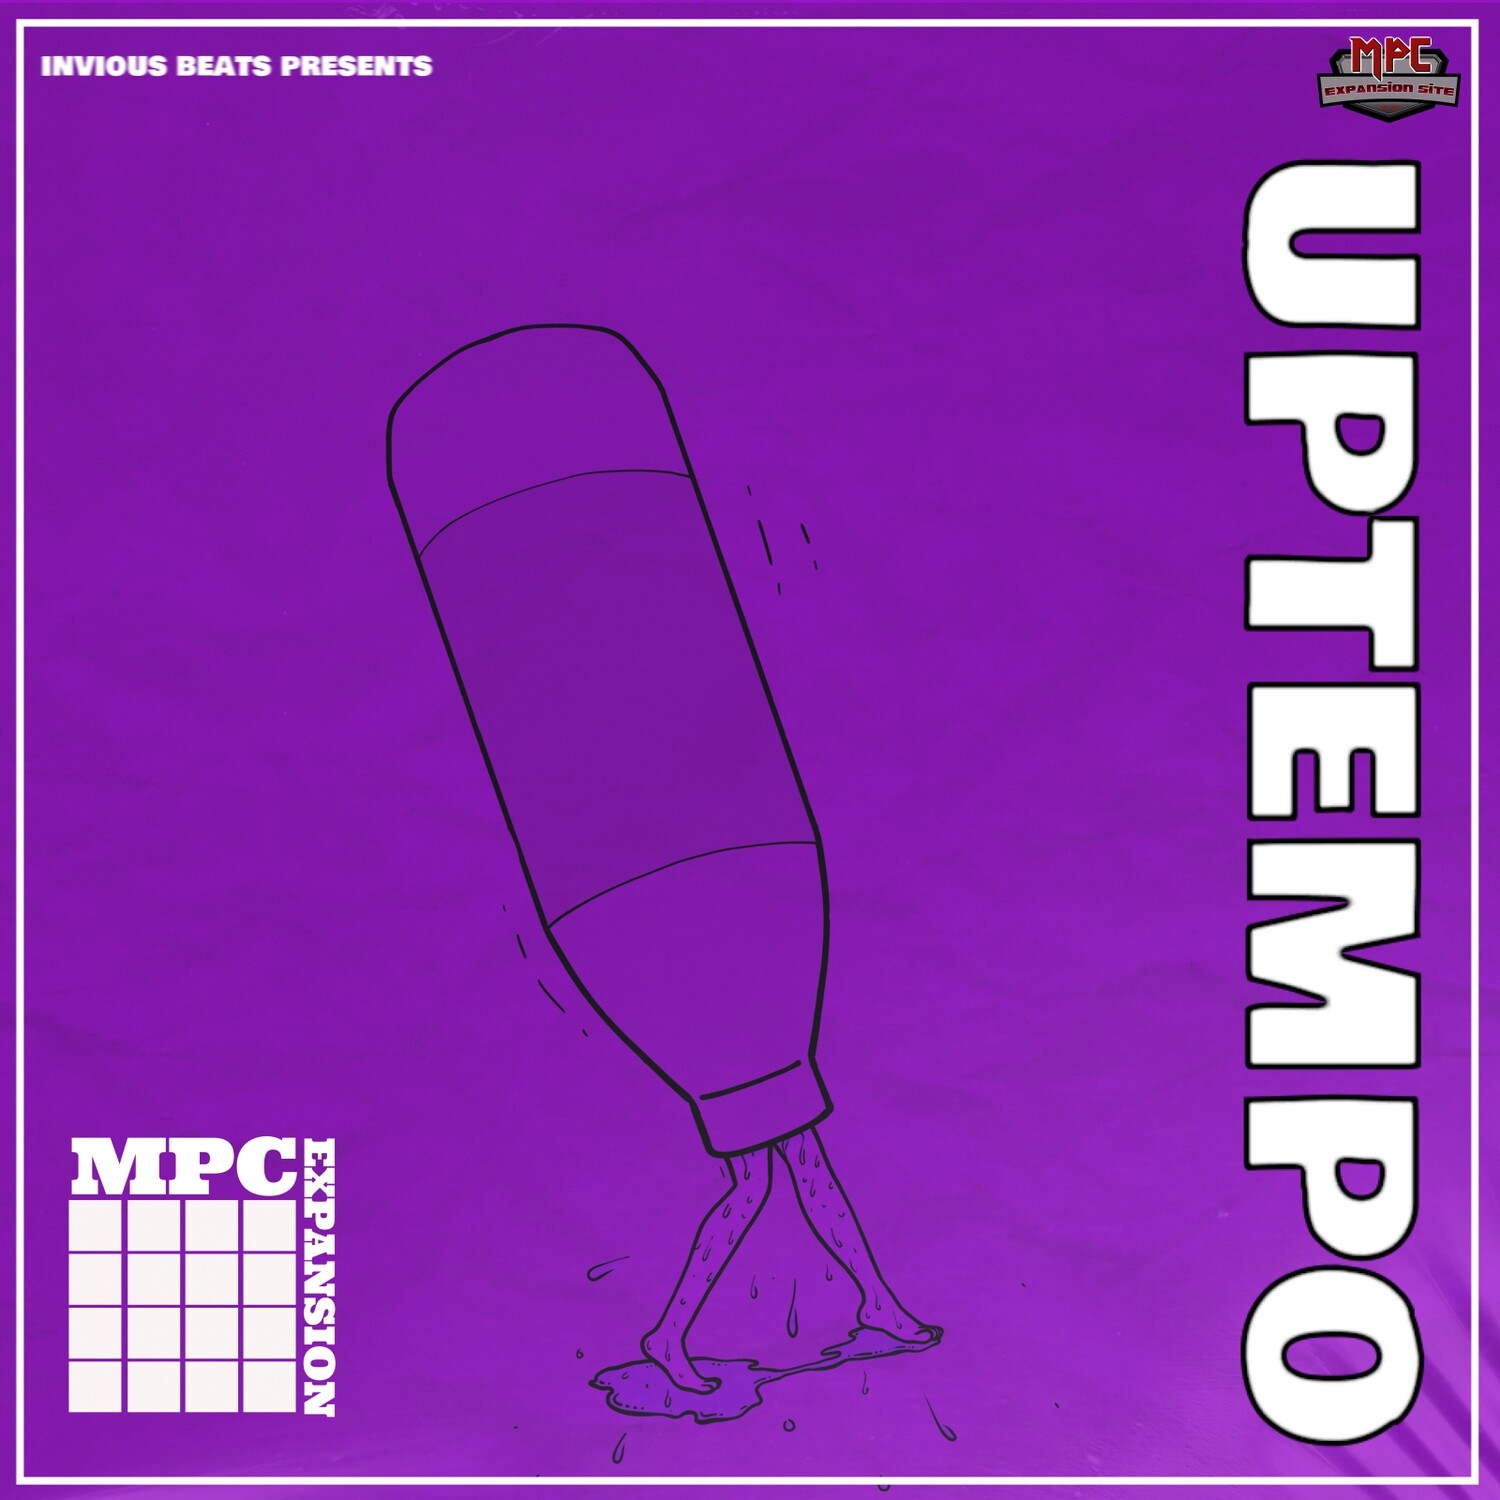 MPC EXPANSION 'UPTEMPO' by INVIOUS